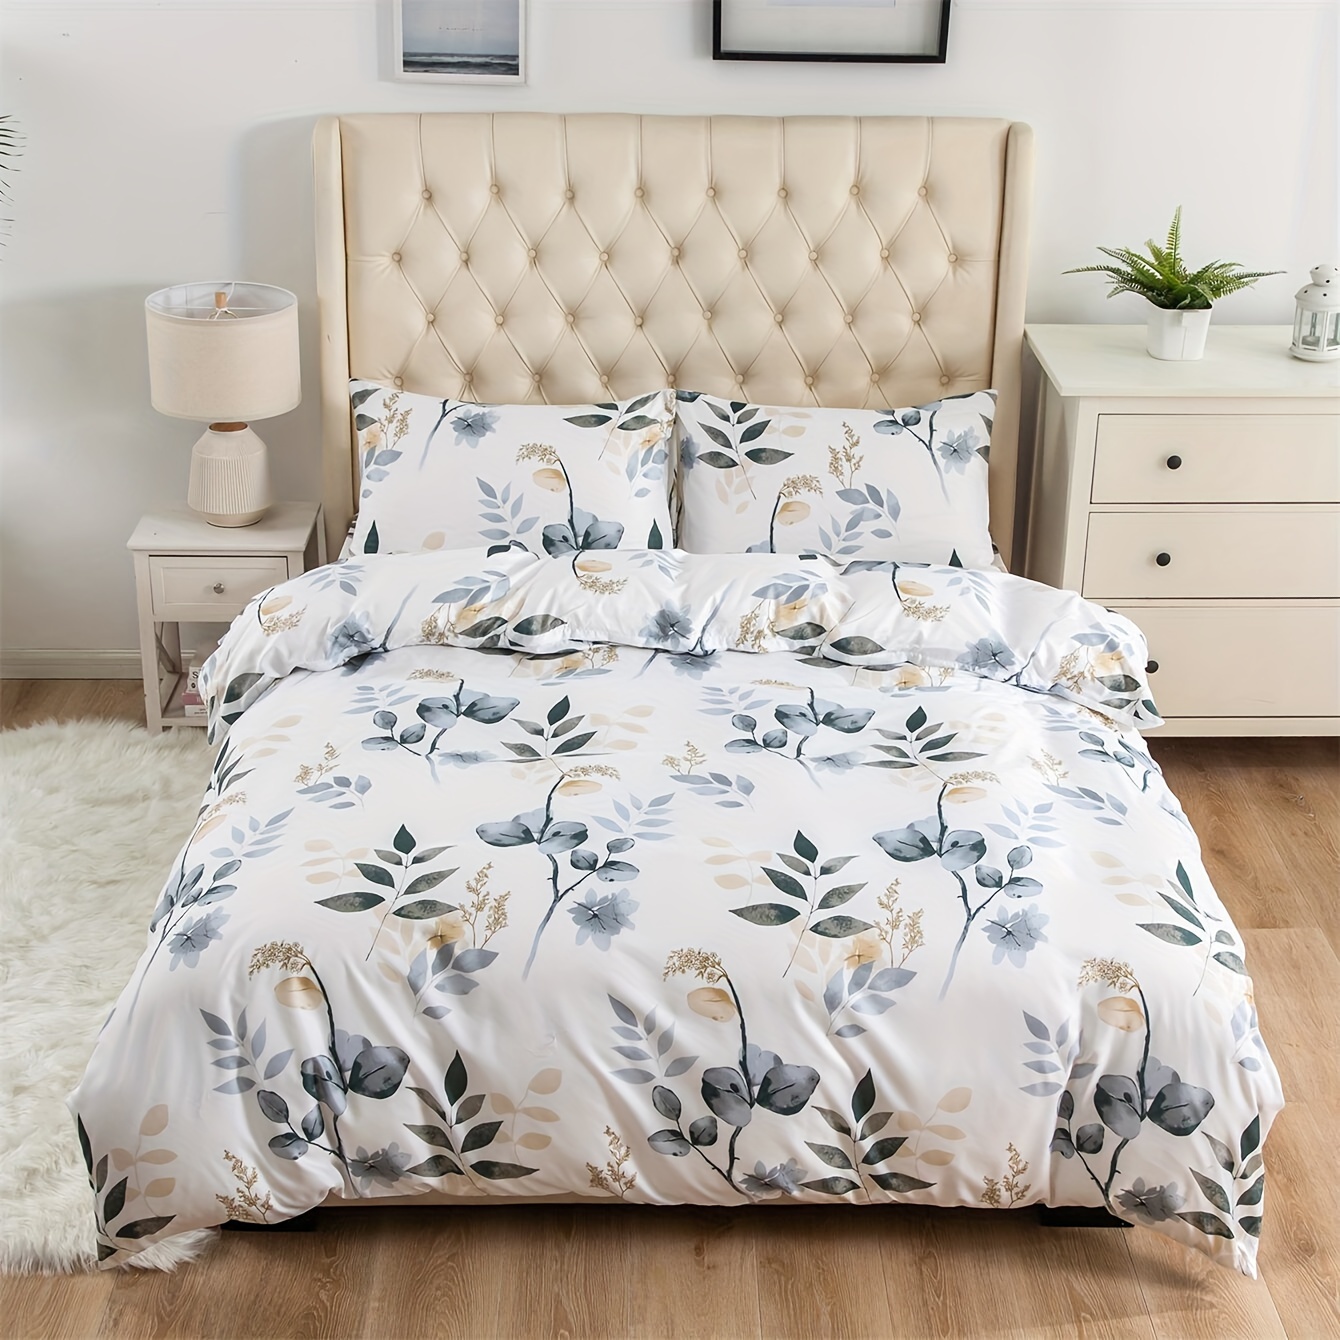 

Floral Lightweight Duvet Cover Set With Zipper Closure - 3 Piece Set Includes 2 Pillowcases, Machine Washable Polyester, All-season Comfort - No Duvet Insert Included